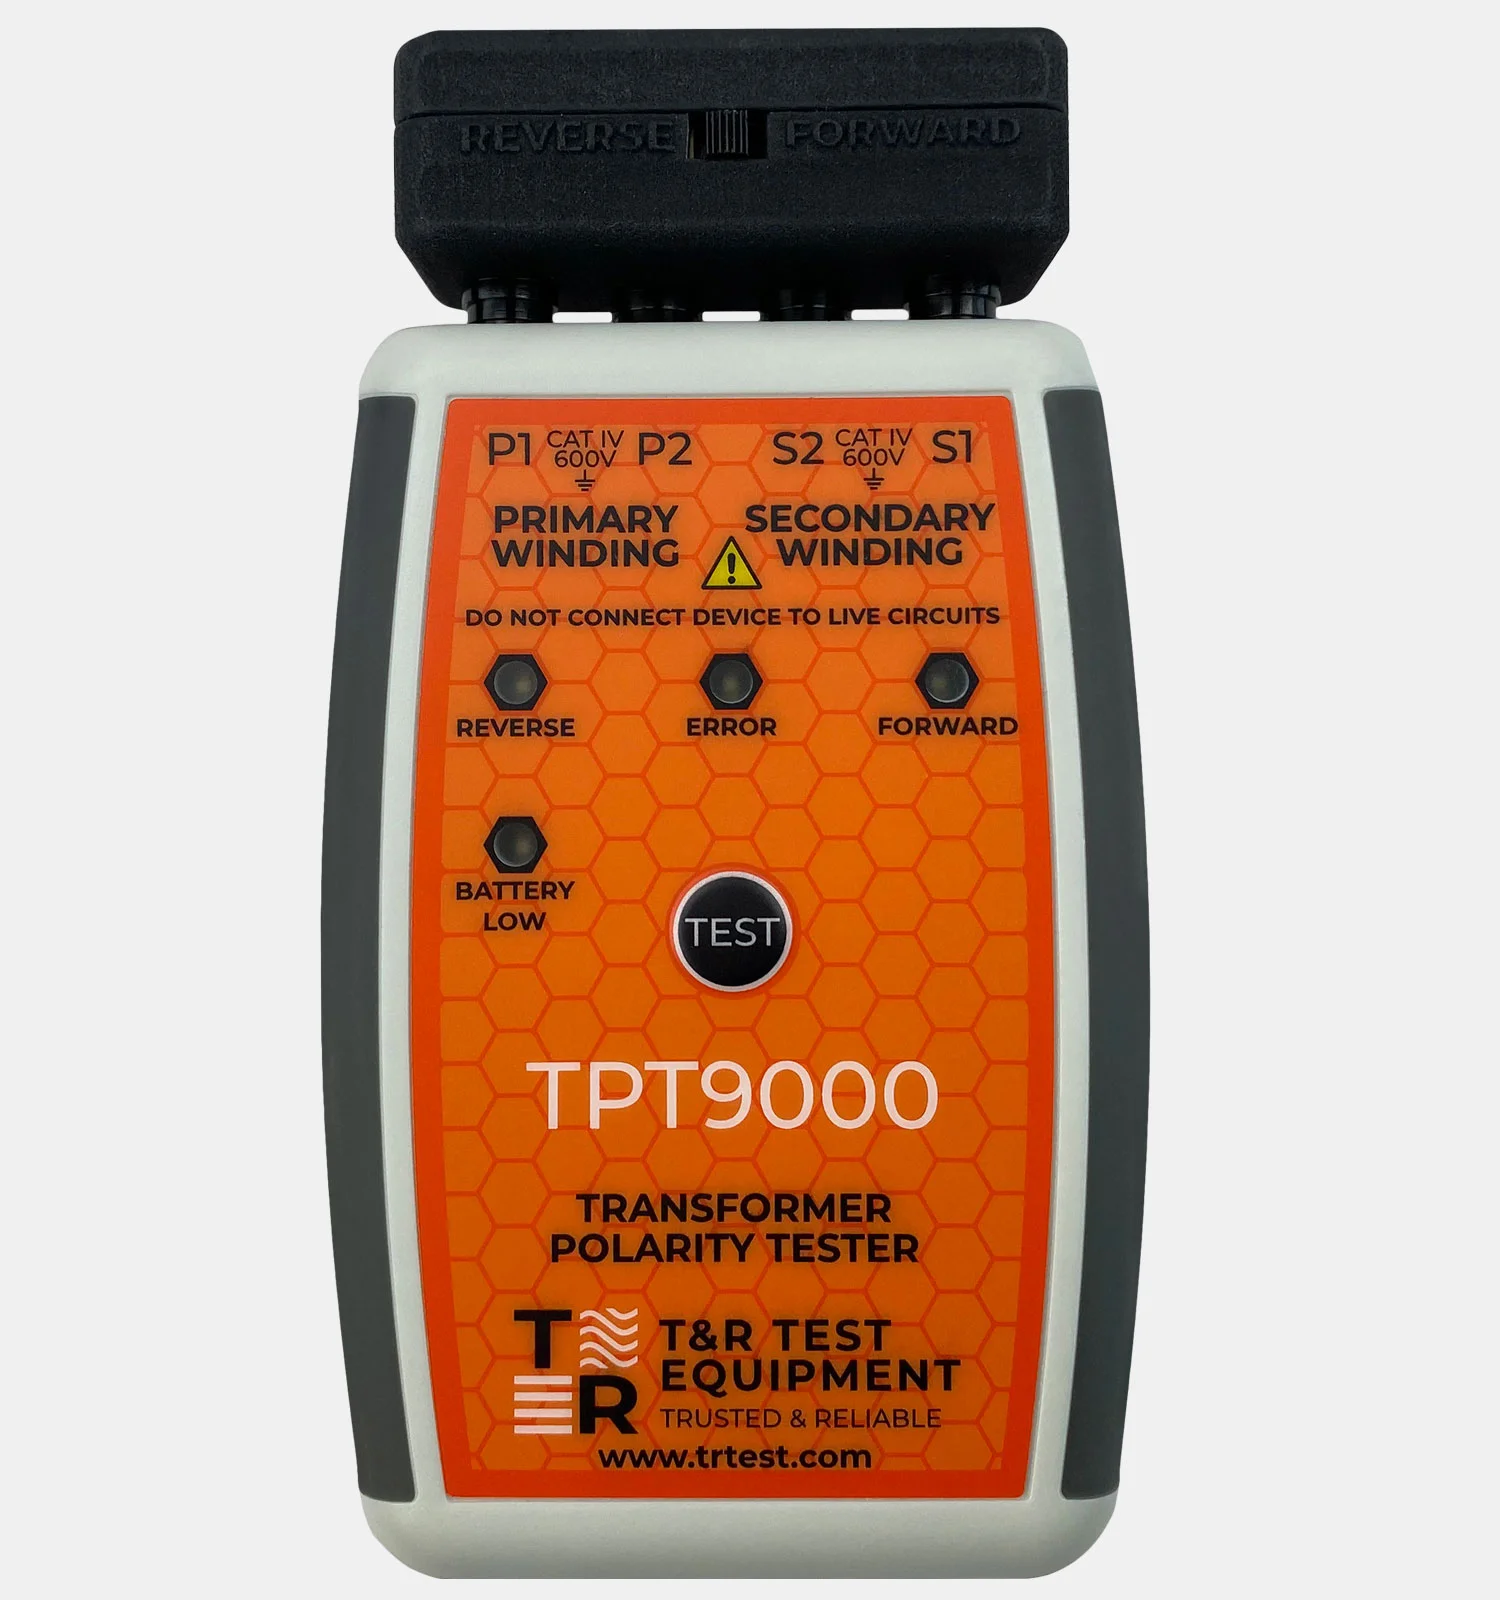 Suppliers of TPT9000 Transformer Polarity Tester